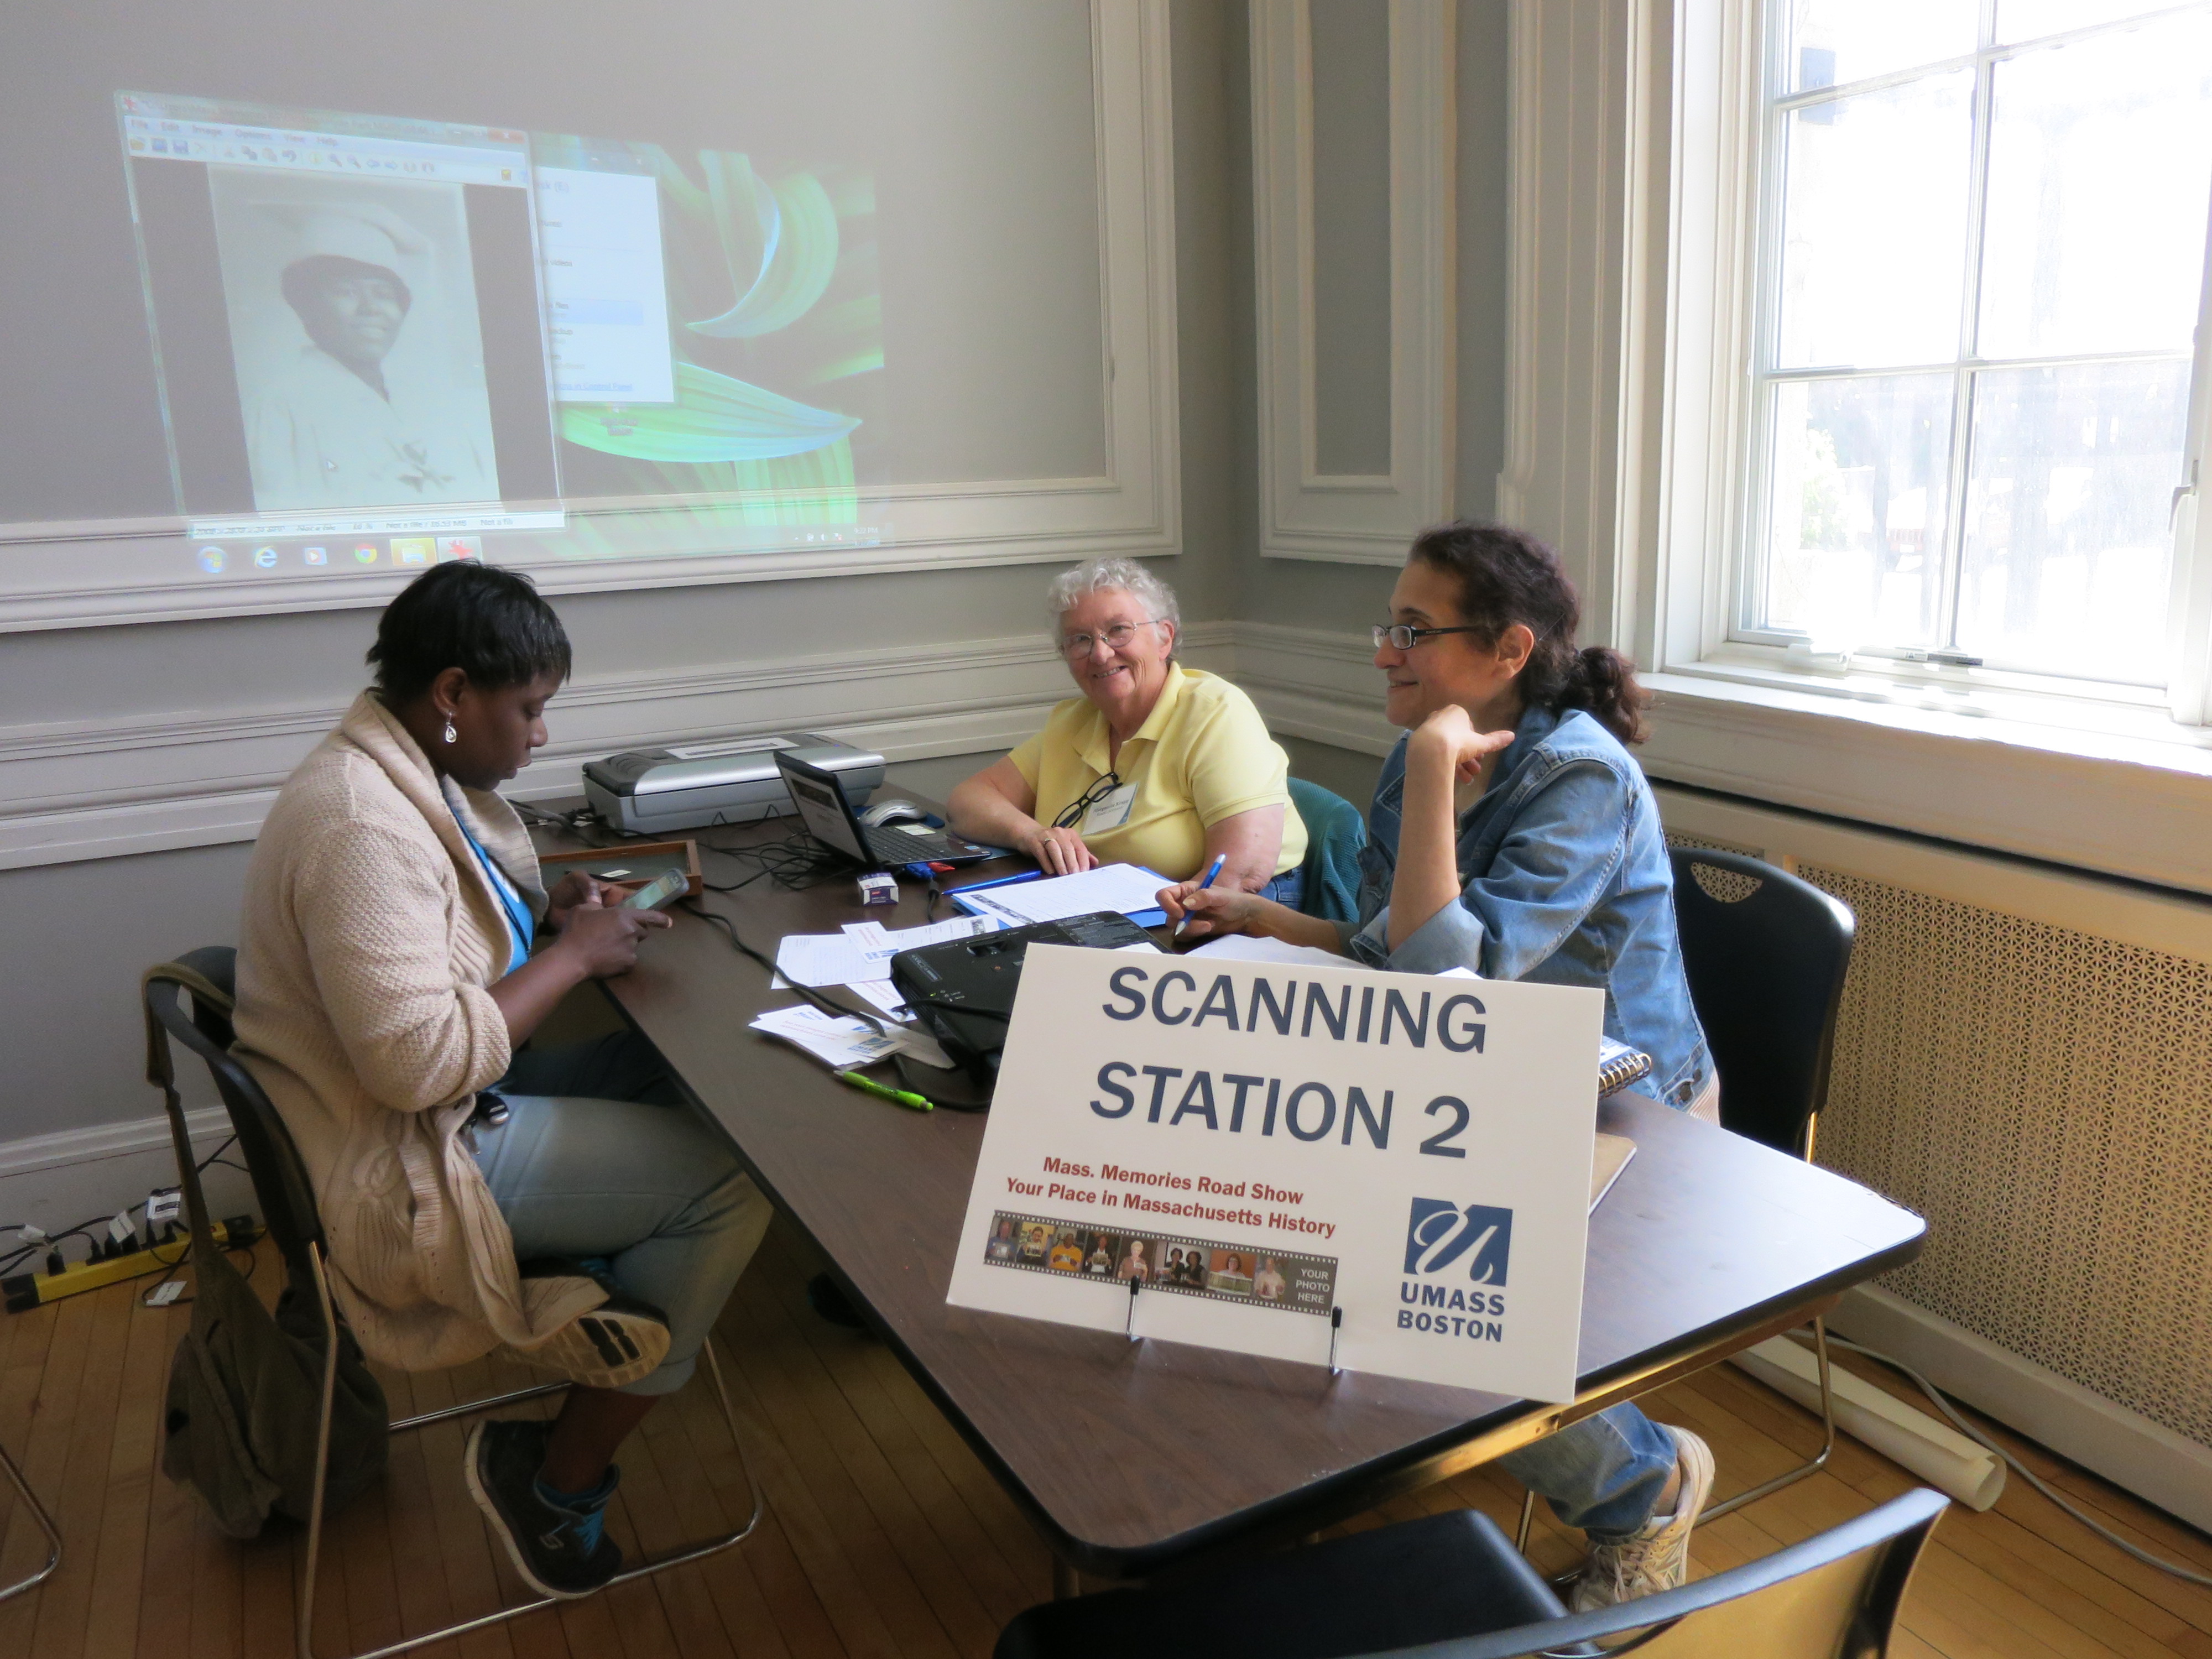 <p>Scanning Station (also known as the Copying Station) at the Hyde Park (Boston) Mass. Memories Road Show, 2016</p>